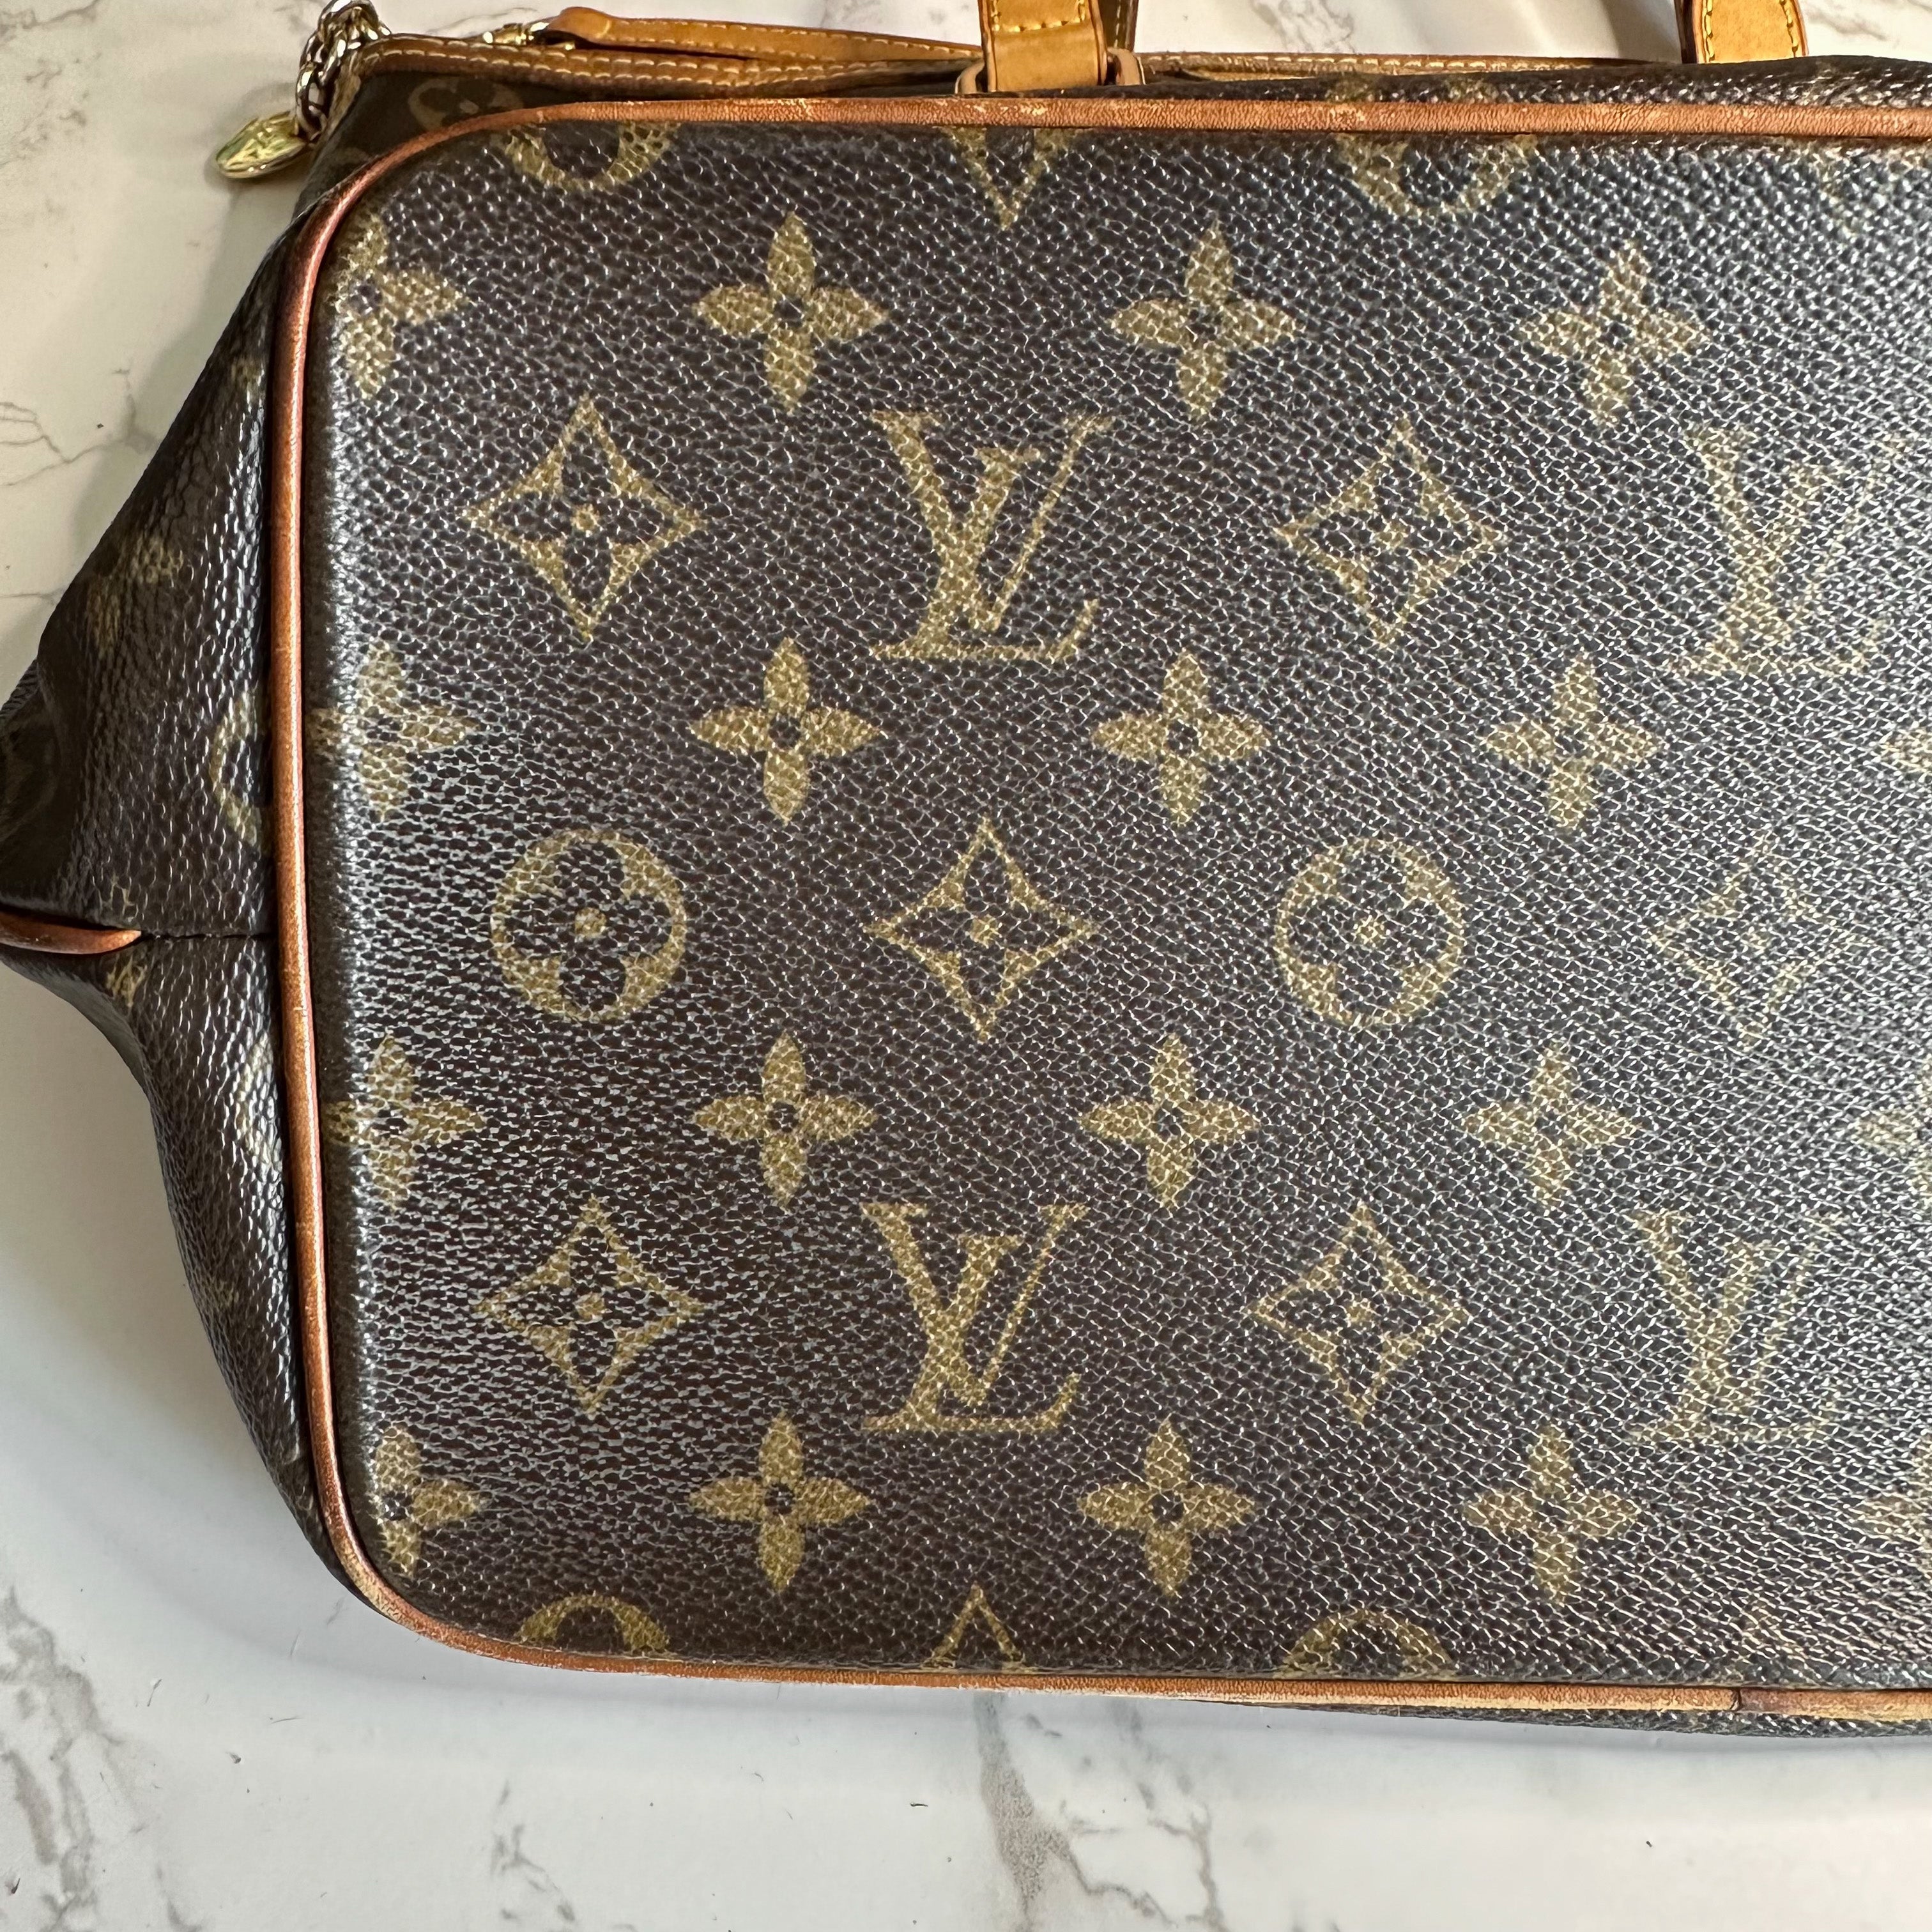 Louis Vuitton Palermo bag in monogram canvas and natural leather